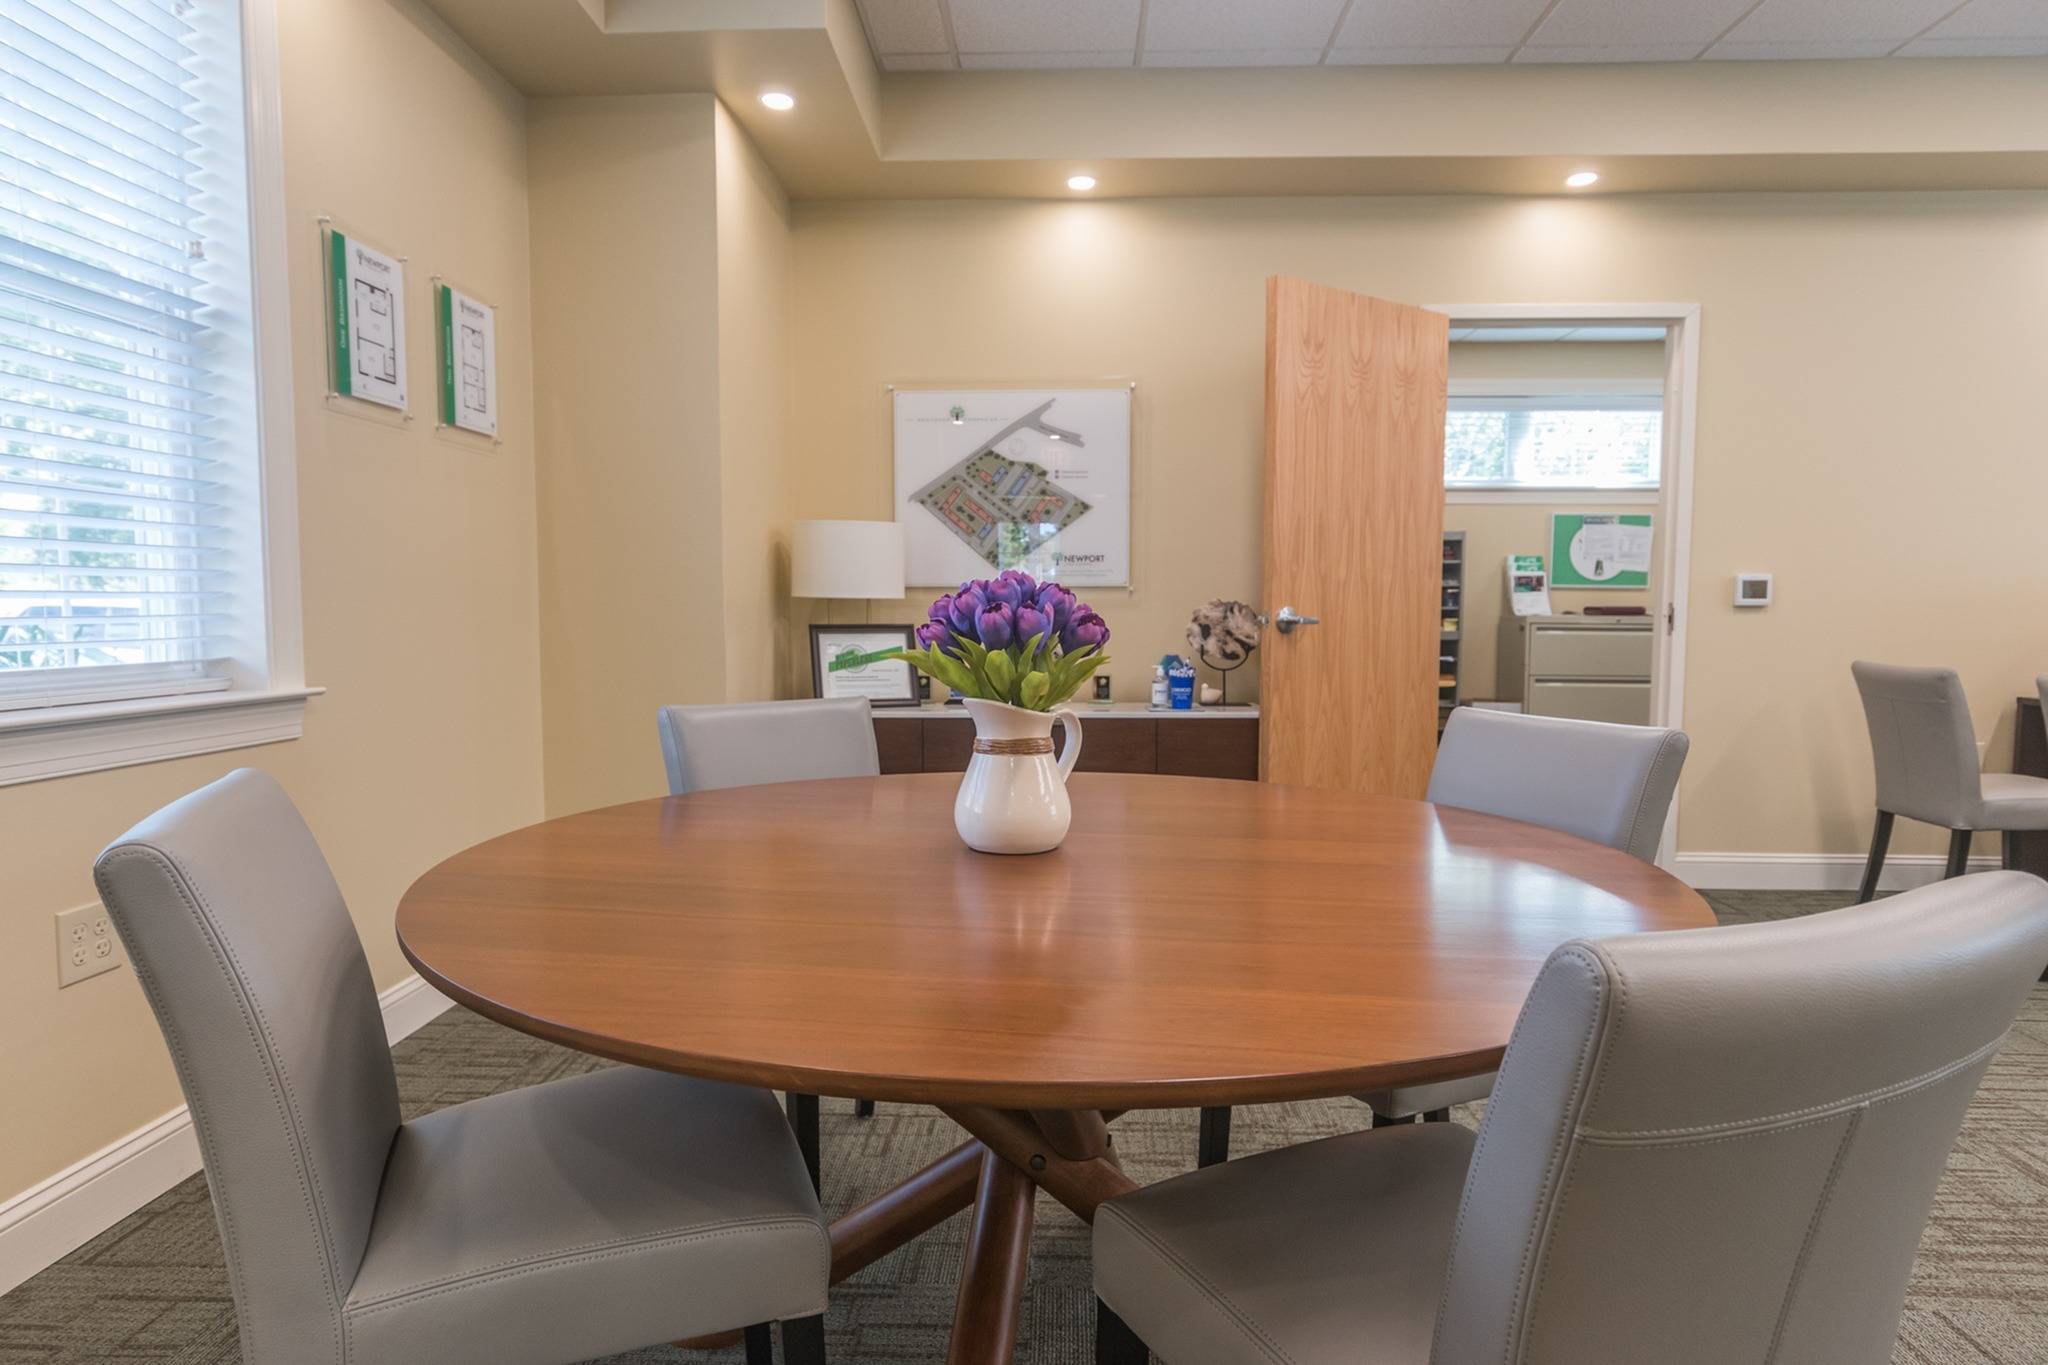 Circular table in the leasing office at Newport Village Apartments.